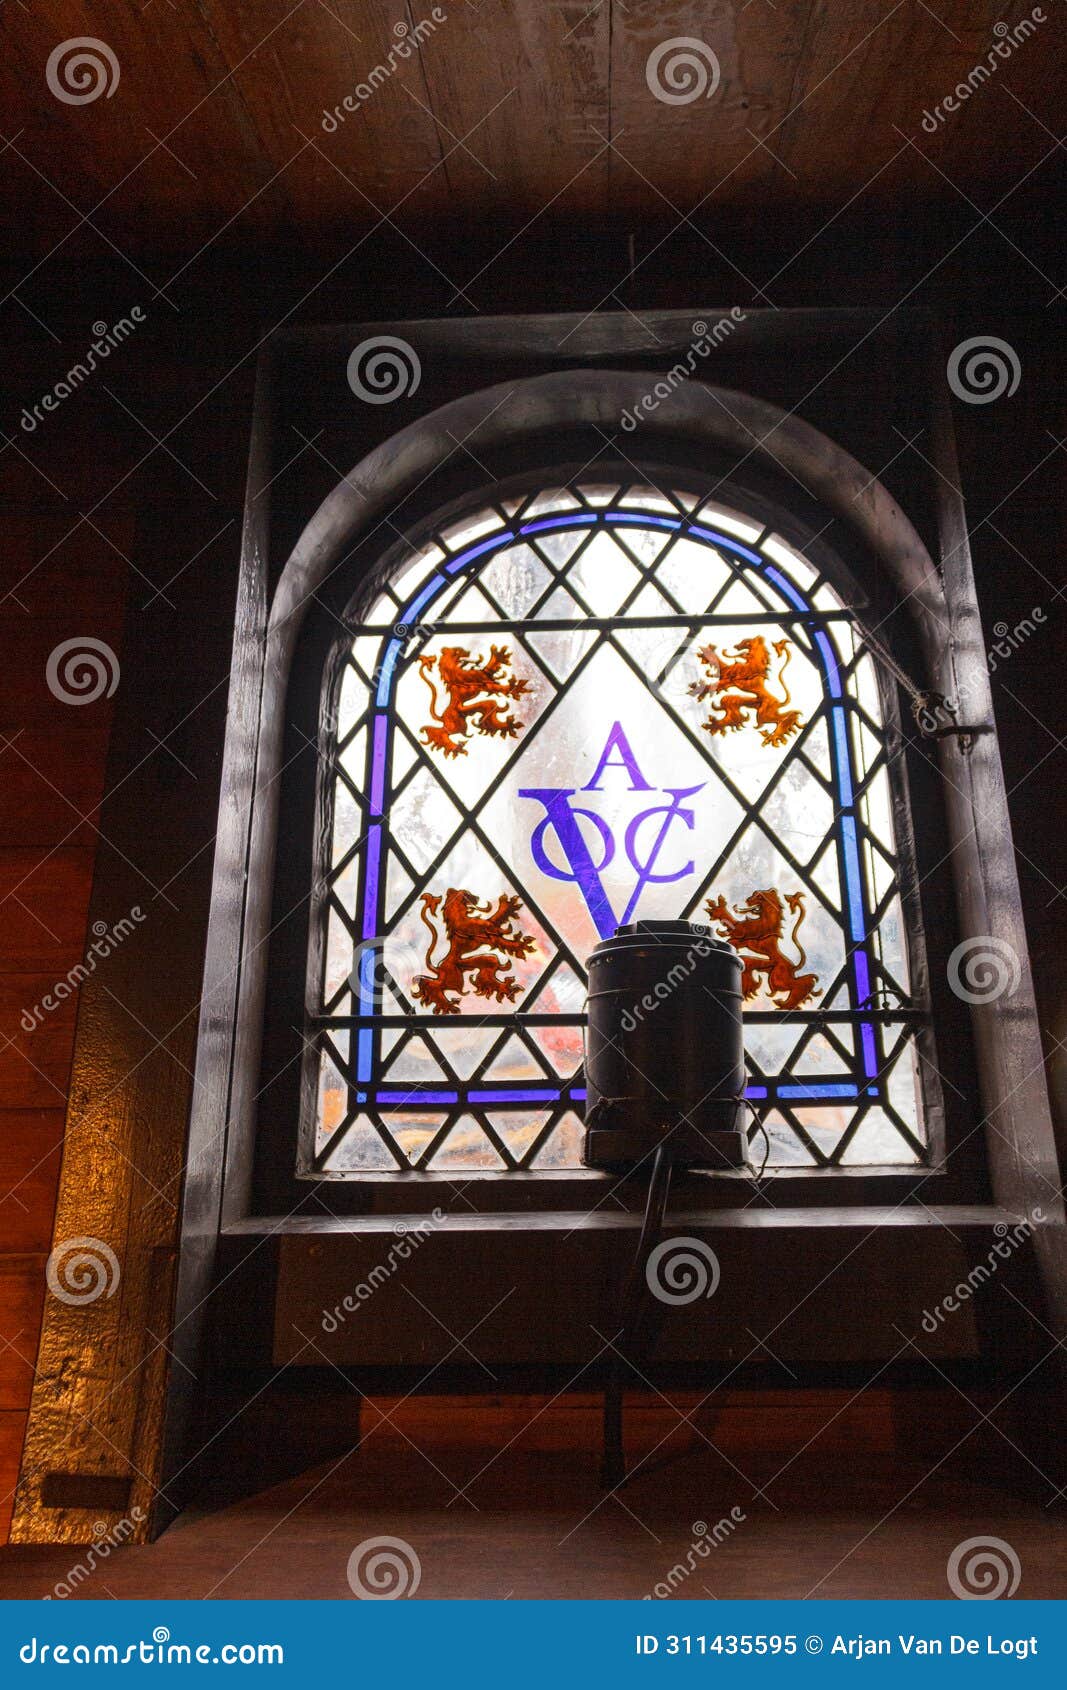 kampen, the netherlands - march 30, 2018: kampen, the netherlands - march 30, 2018: window with logo of the dutch verenigde oost-